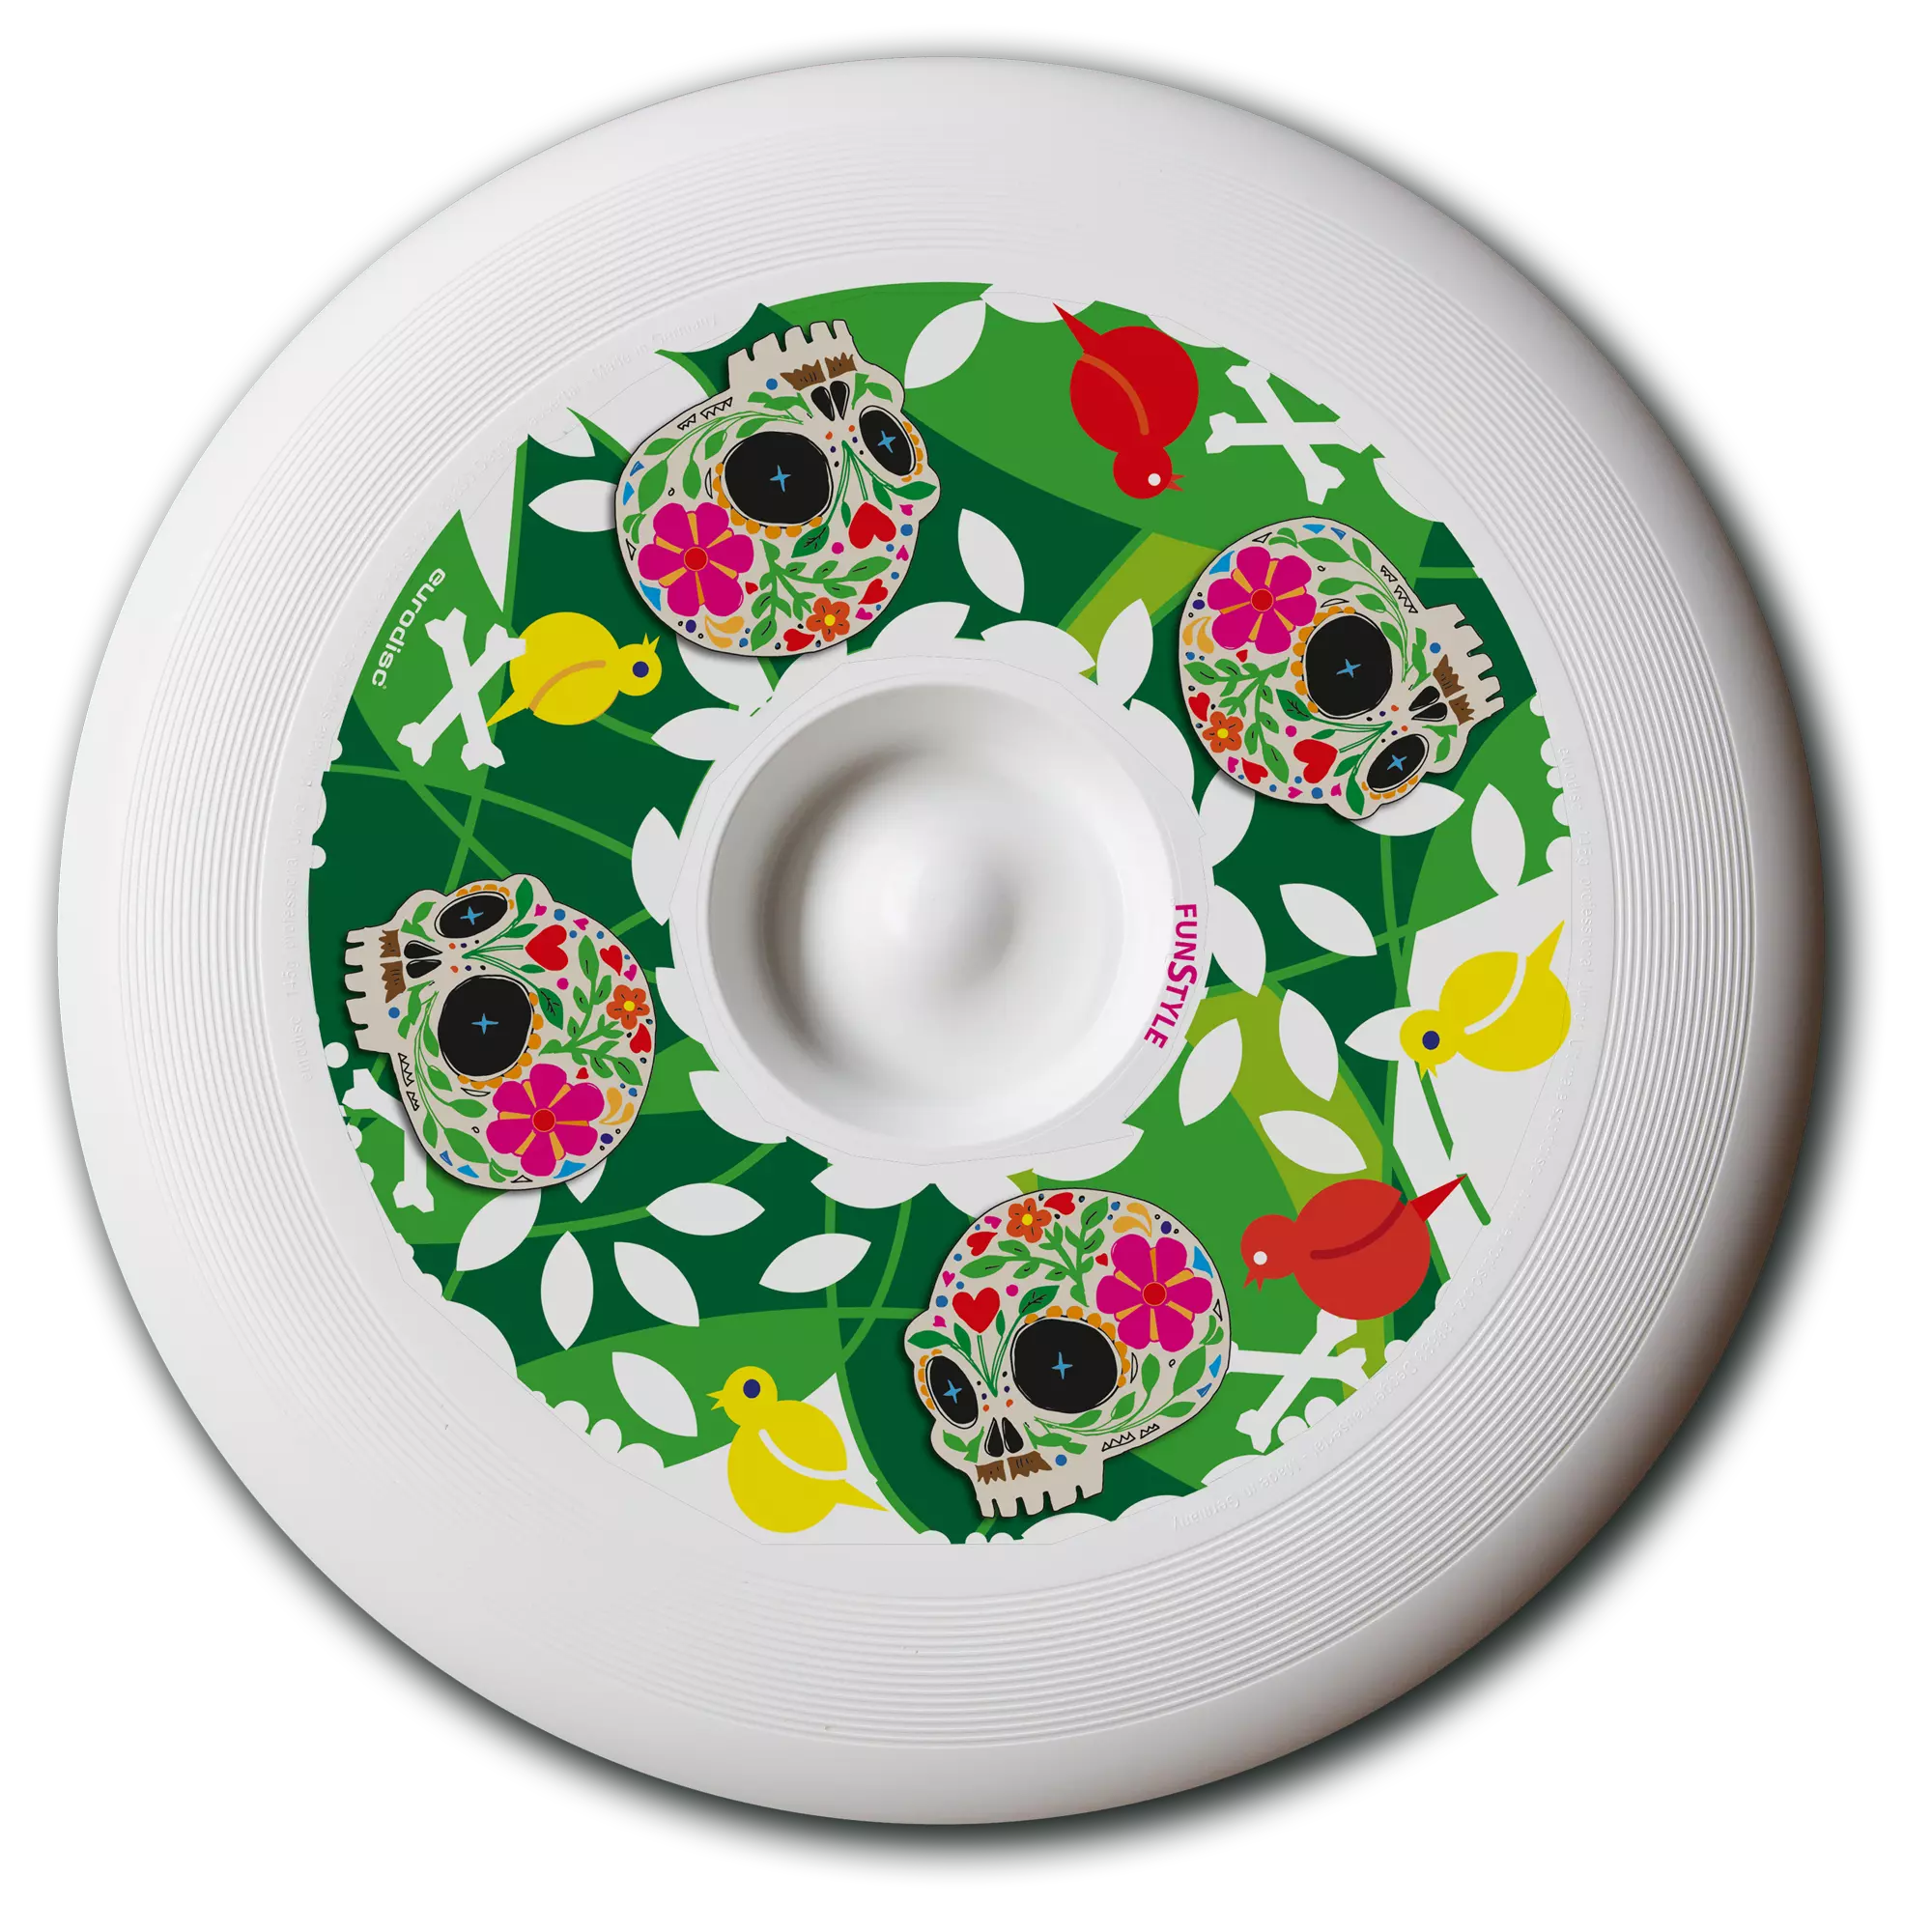 eurodisc 145g Junior WEISS Funstyle MEXICAN